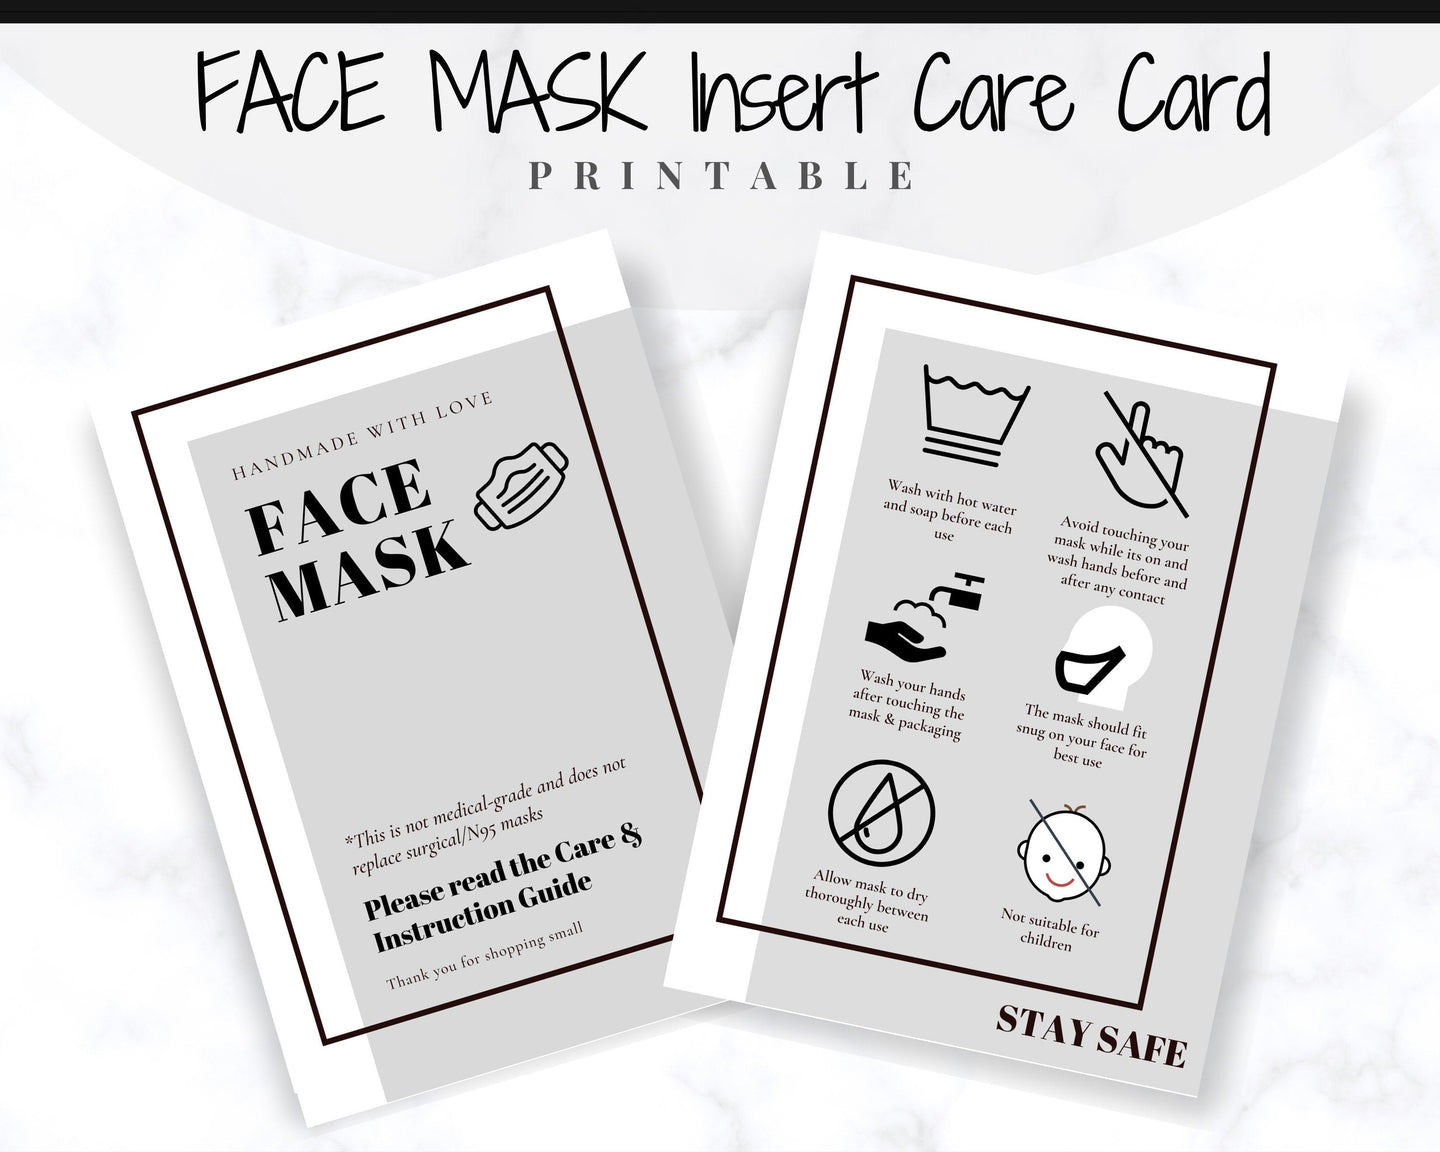 Face Mask LABEL CARE CARD, How to Handle Order Card, Face Mask Printable Instructions, Business Labels, Face Mask Seller, Package Label Tag | Monochrome